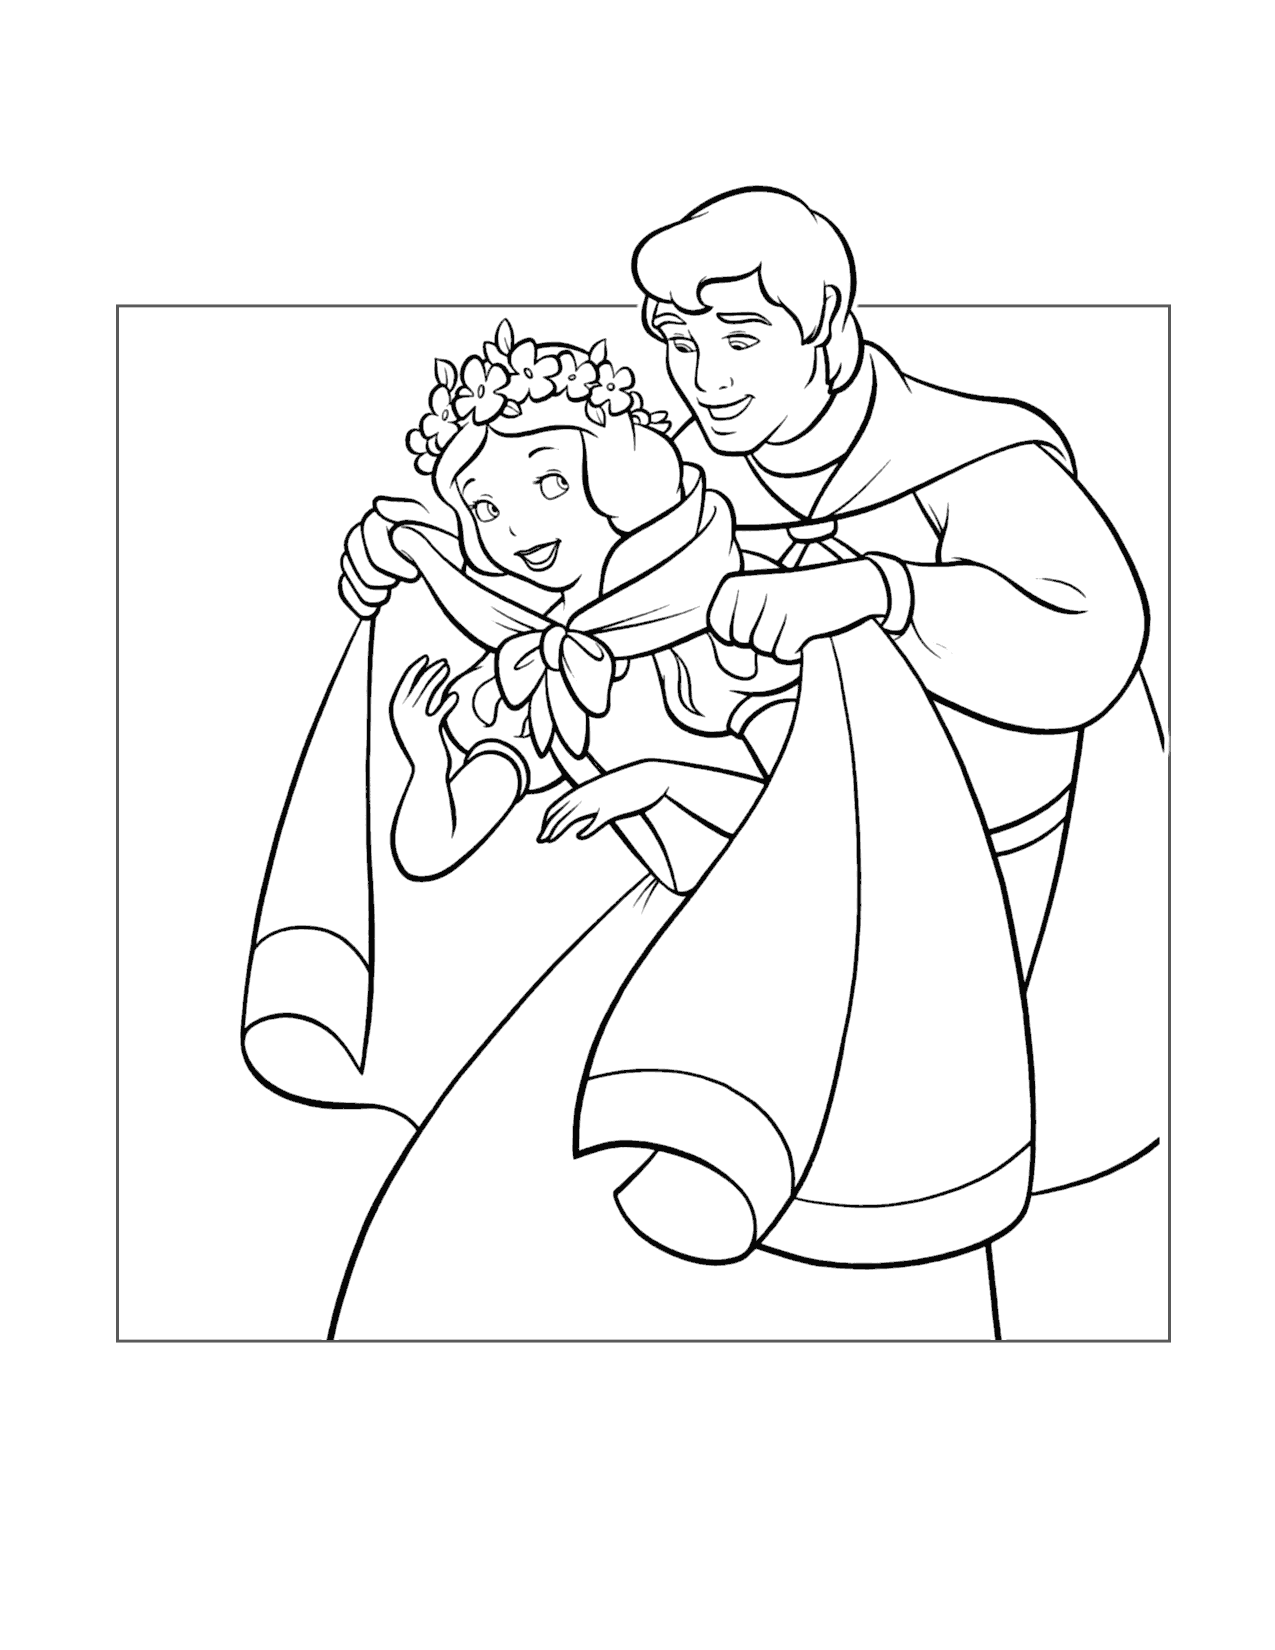 Prince Charming Helps Snow White Coloring Page